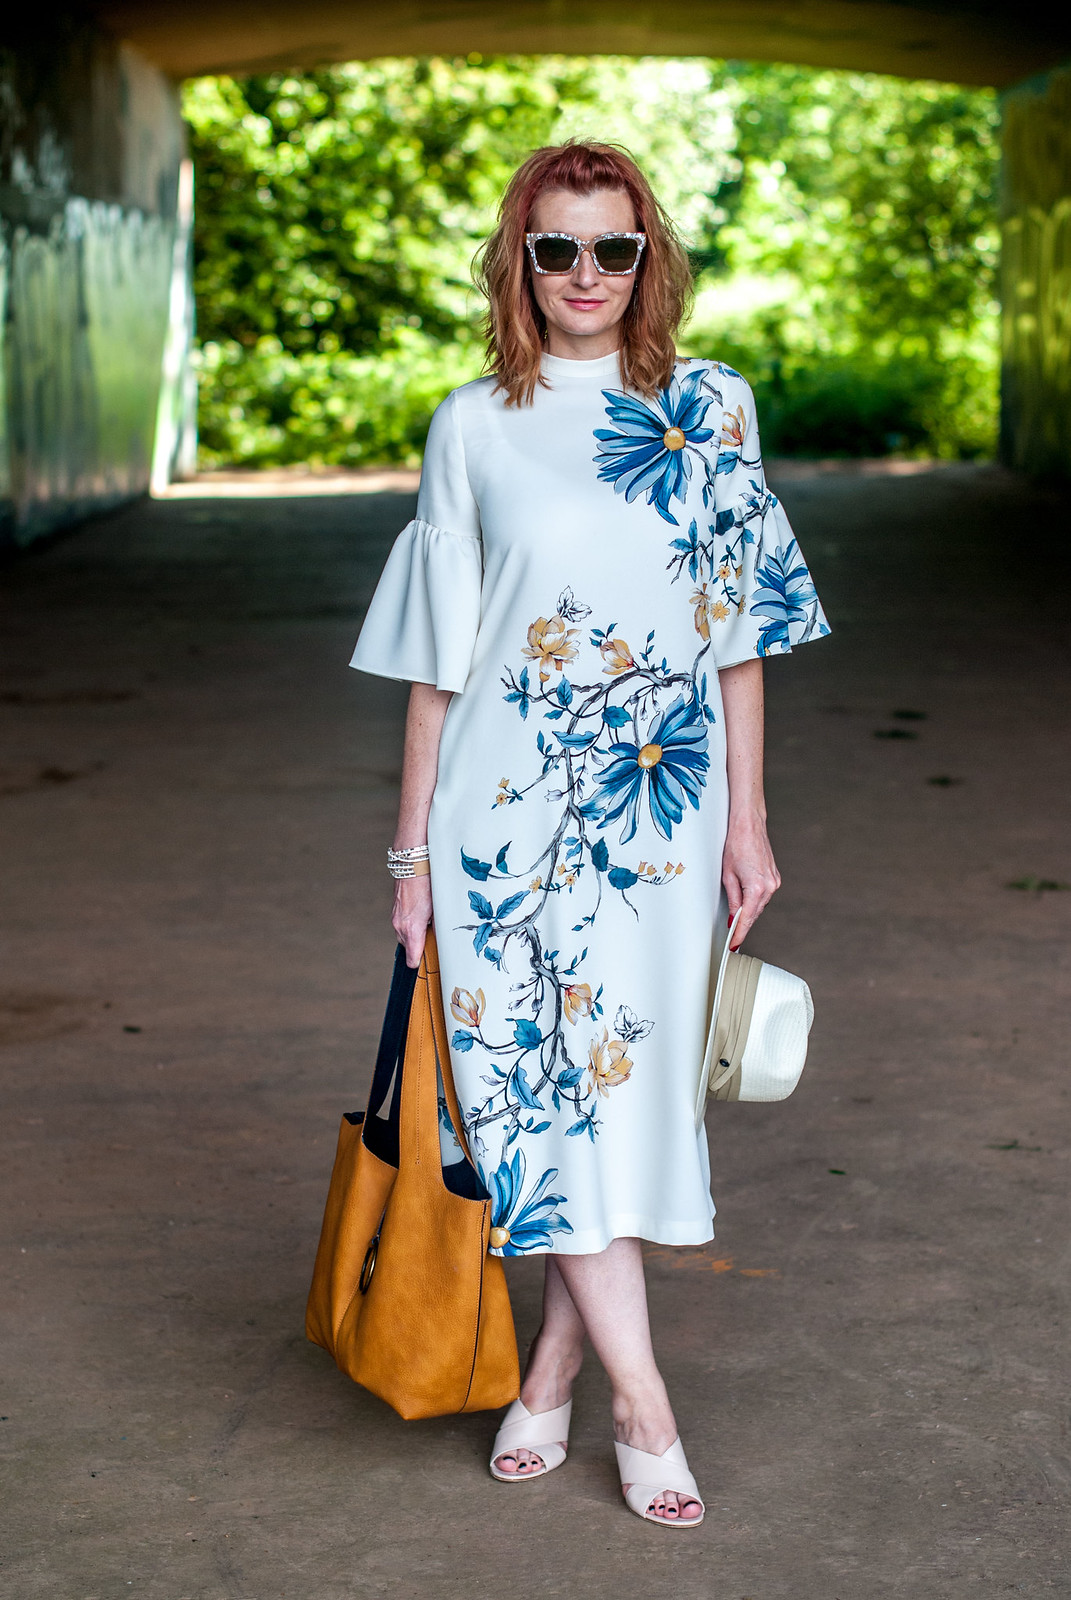 Wedding guest or garden party outfit: Marks & Spencer floral midi dress with flared sleeves \ nude cage heel mules \ pearl sunglasses | Not Dressed As Lamb, over 40 style